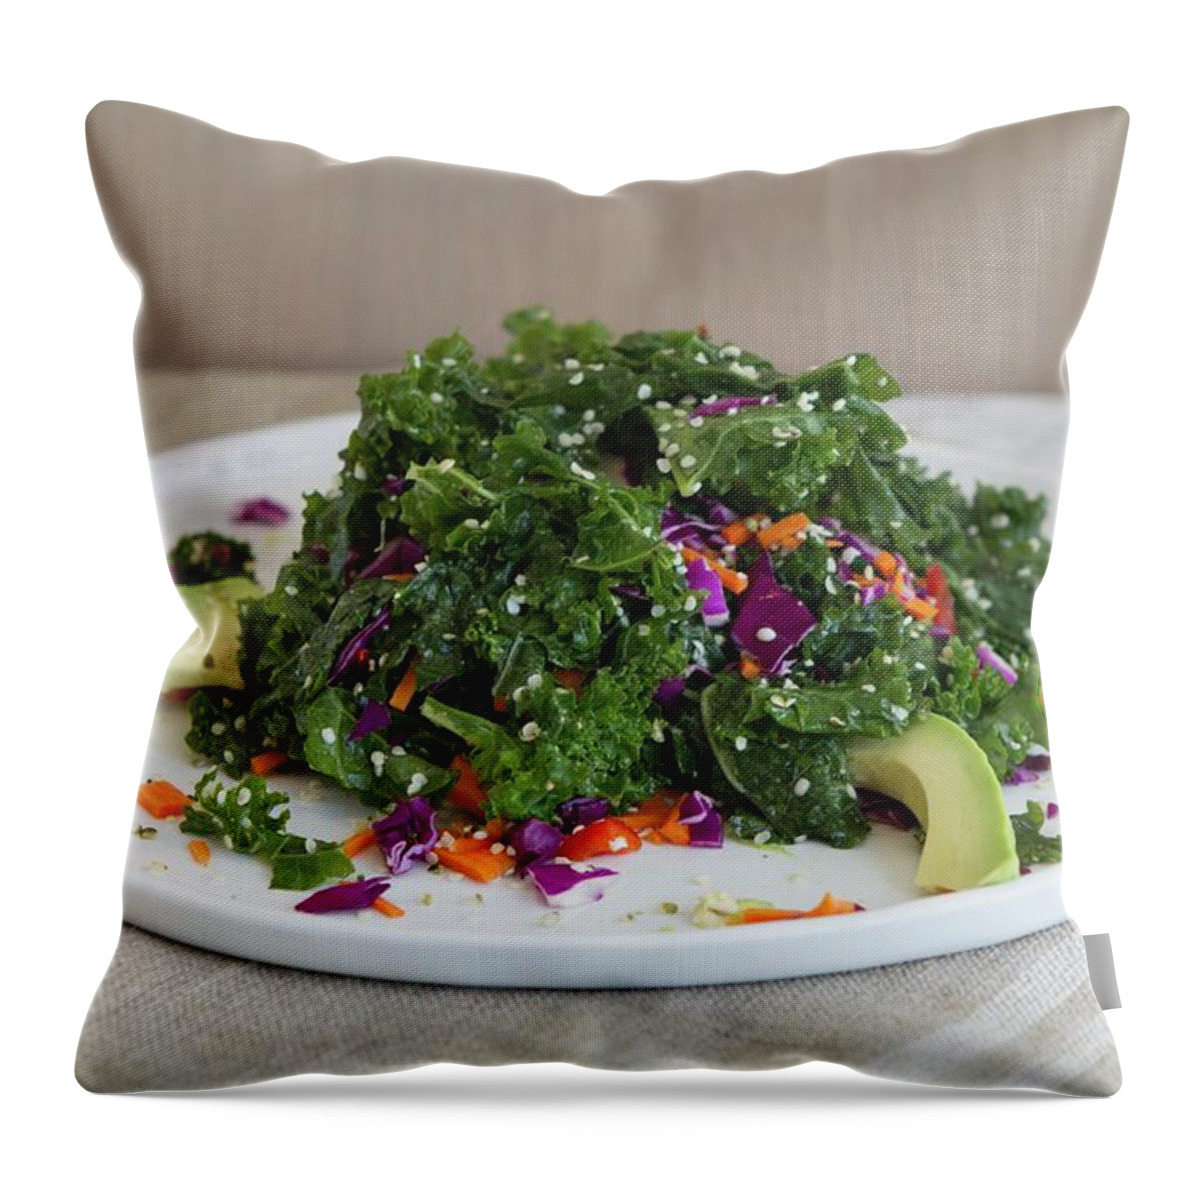 Ip_11333176 Throw Pillow featuring the photograph Kale Salad With Hemp Seeds, Peppers, Red Cabbage, Carrots, Avocado And A Lemon And Garlic Vinaigrette by Gus Cantavero Photography